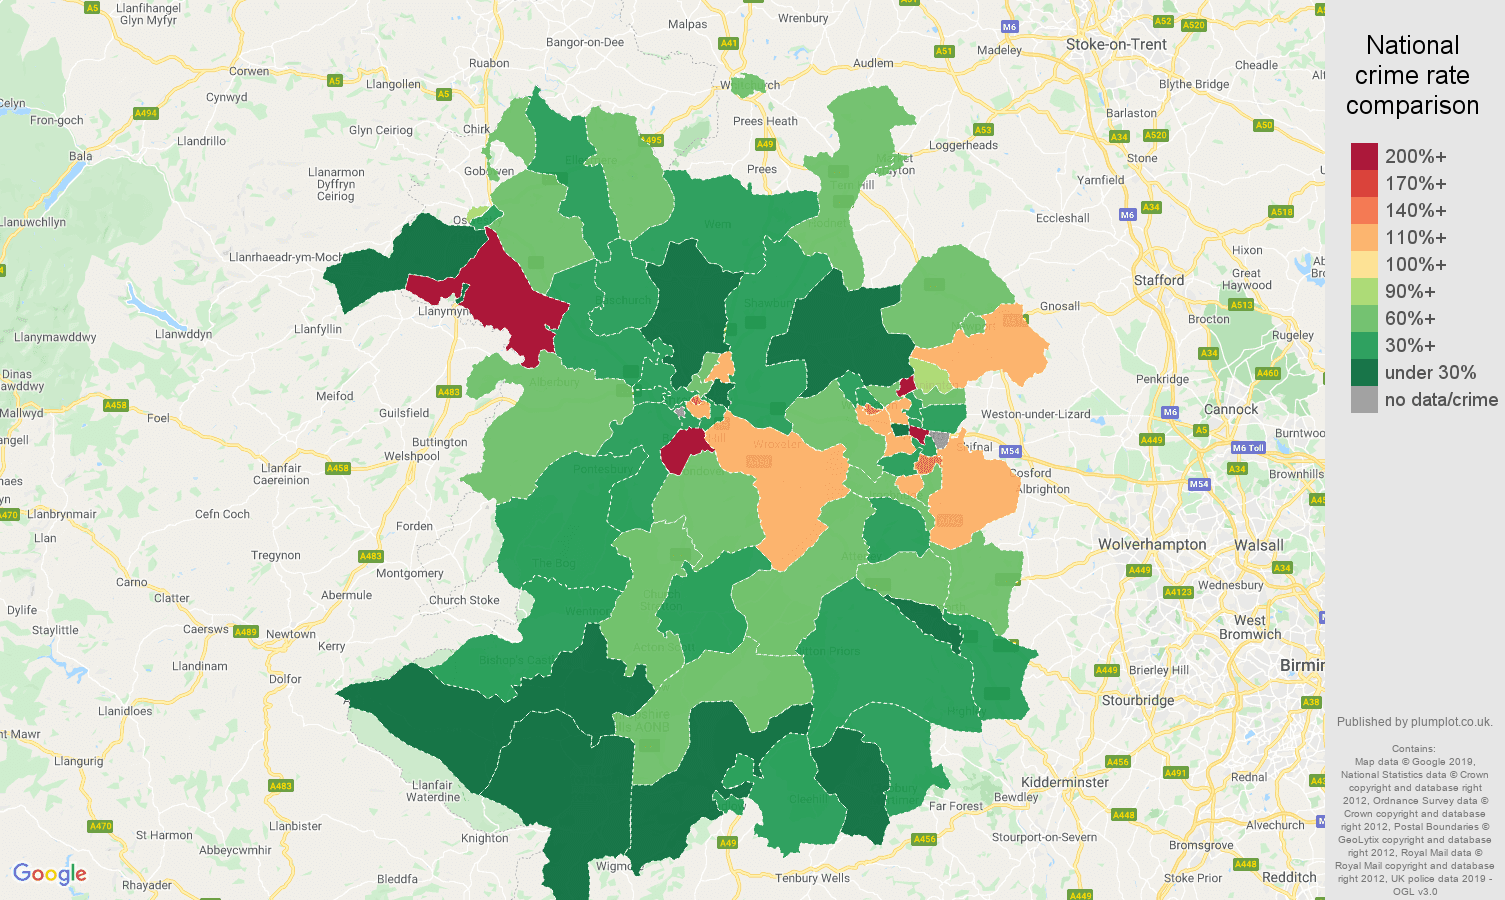 Shropshire other theft crime rate comparison map